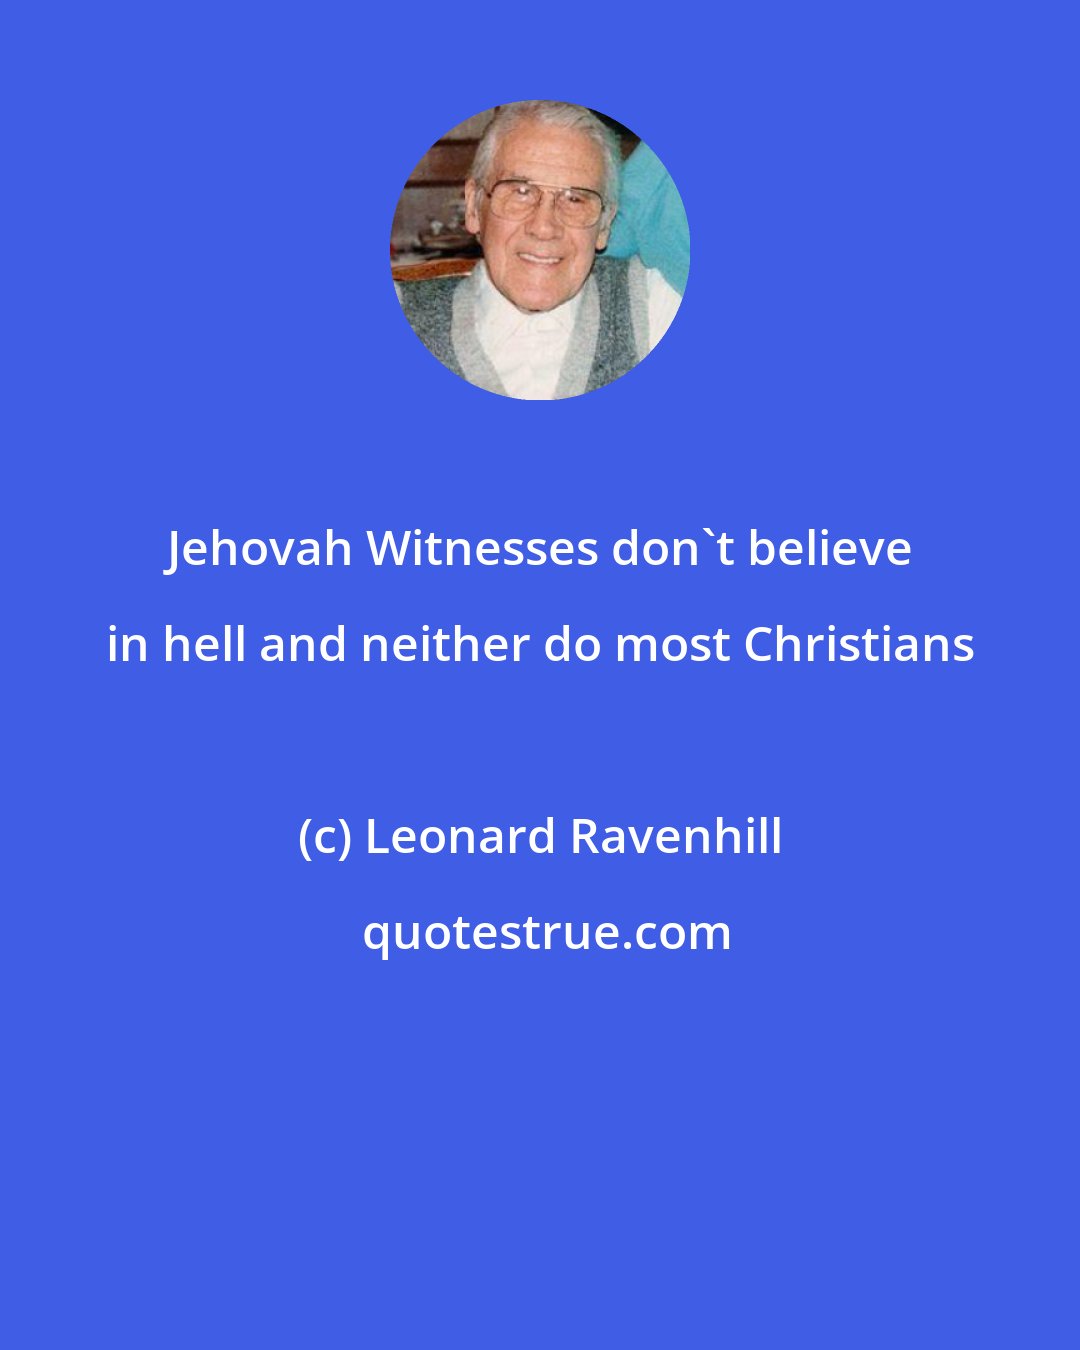 Leonard Ravenhill: Jehovah Witnesses don't believe in hell and neither do most Christians